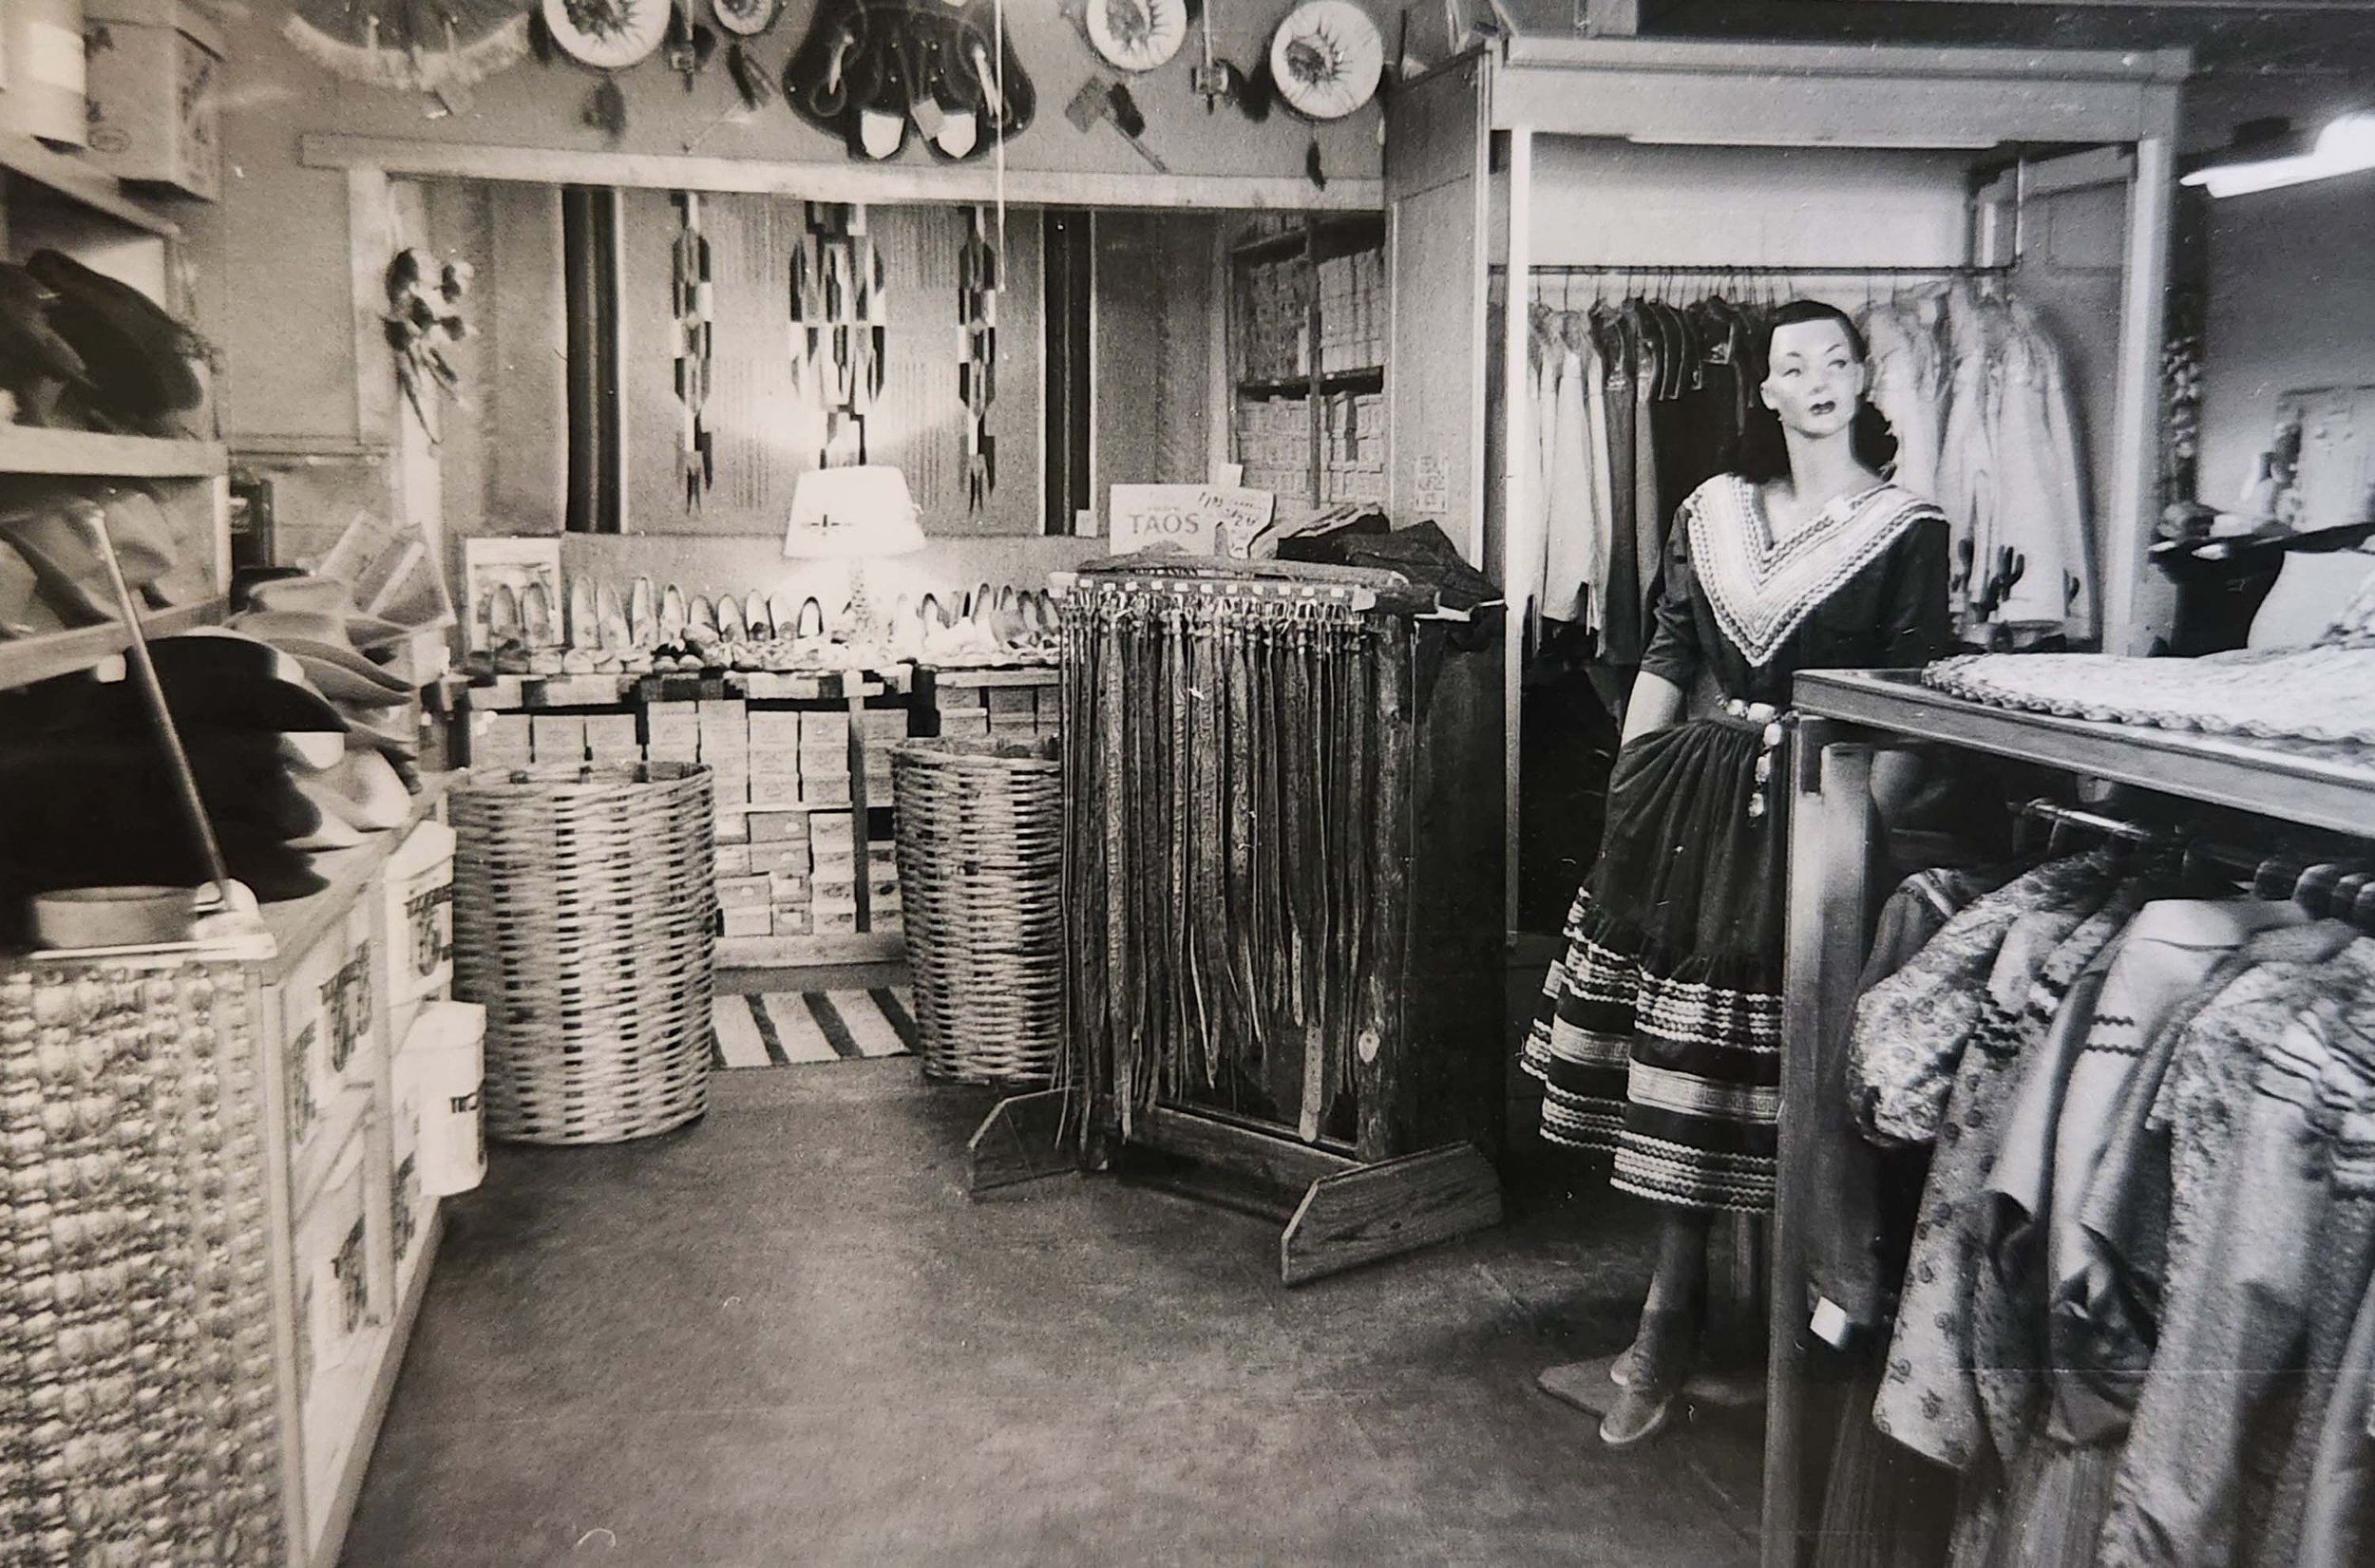 Justin's Western Shop 1950s